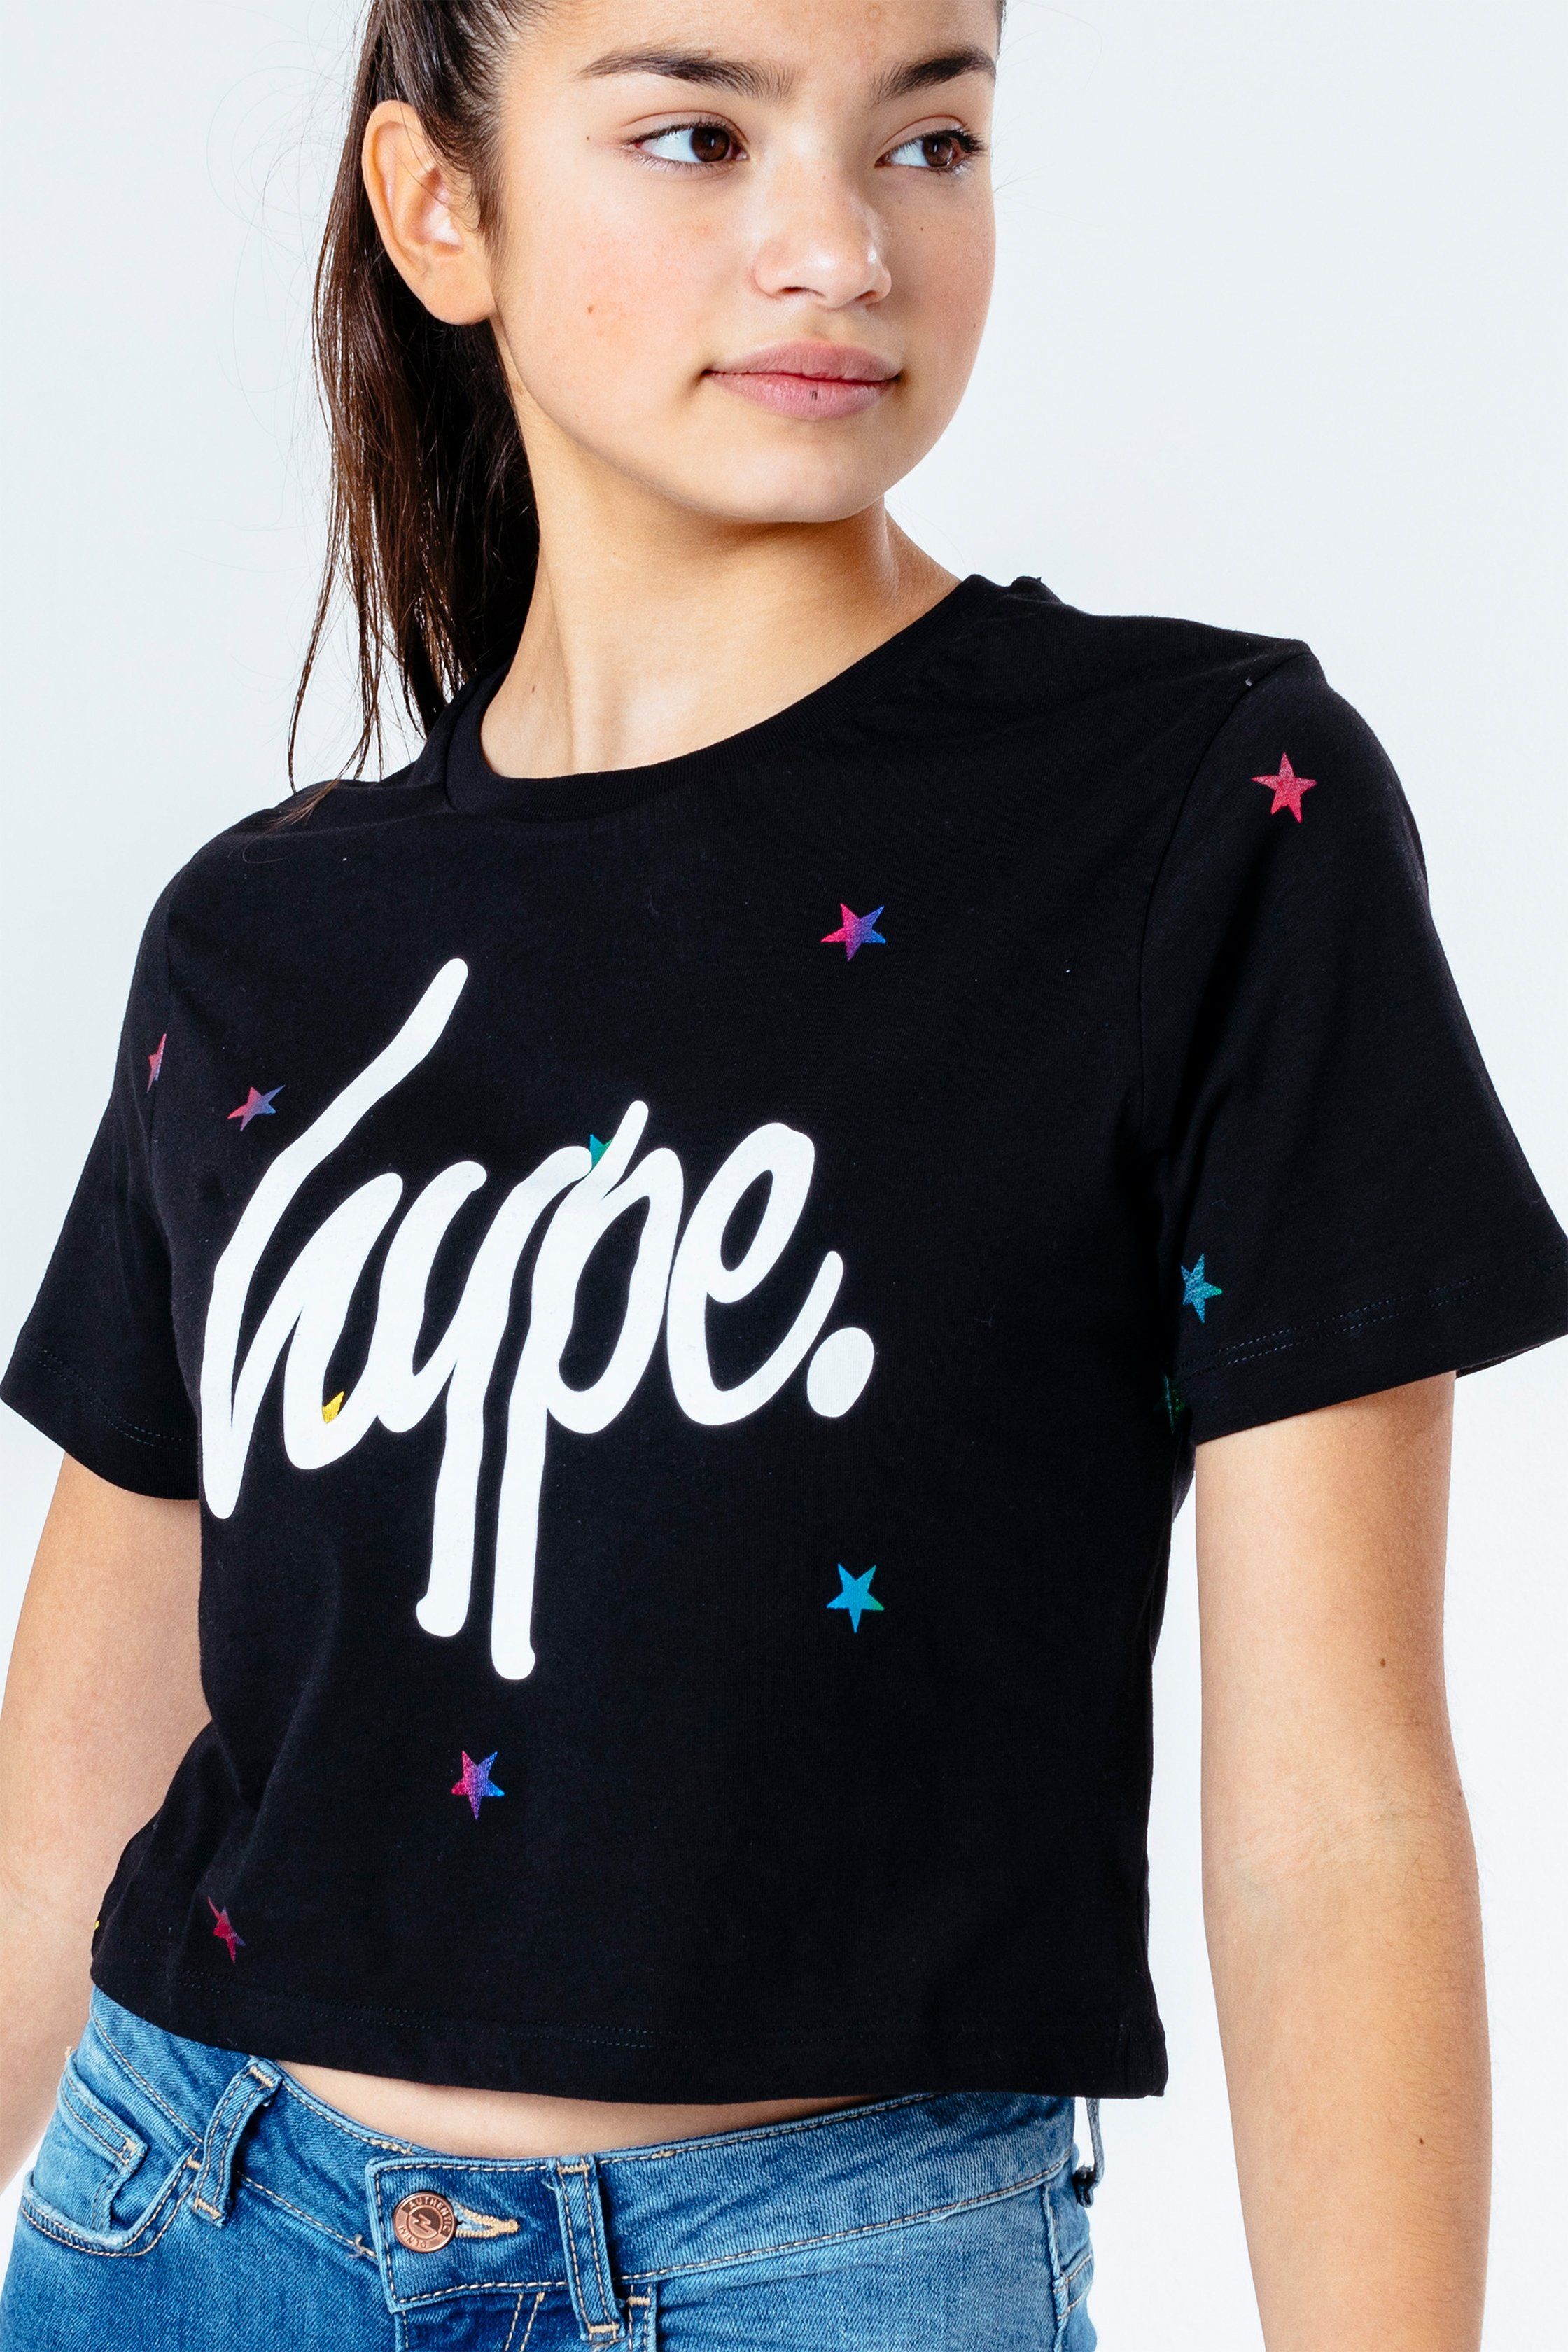 The HYPE. Magic Star Kids Crop T-Shirt is your new go-to tee. Designed in a black 100% cotton fabric base for supreme comfort in our standard crop t-shirt shape, highlighting a crew neck line and short sleeves. With an all-over star print in a rainbow transfer. Finished with the iconic HYPE. script logo in a contrasting white. Wear with the matching runner shorts to complete the look. Machine wash at 30 degrees.